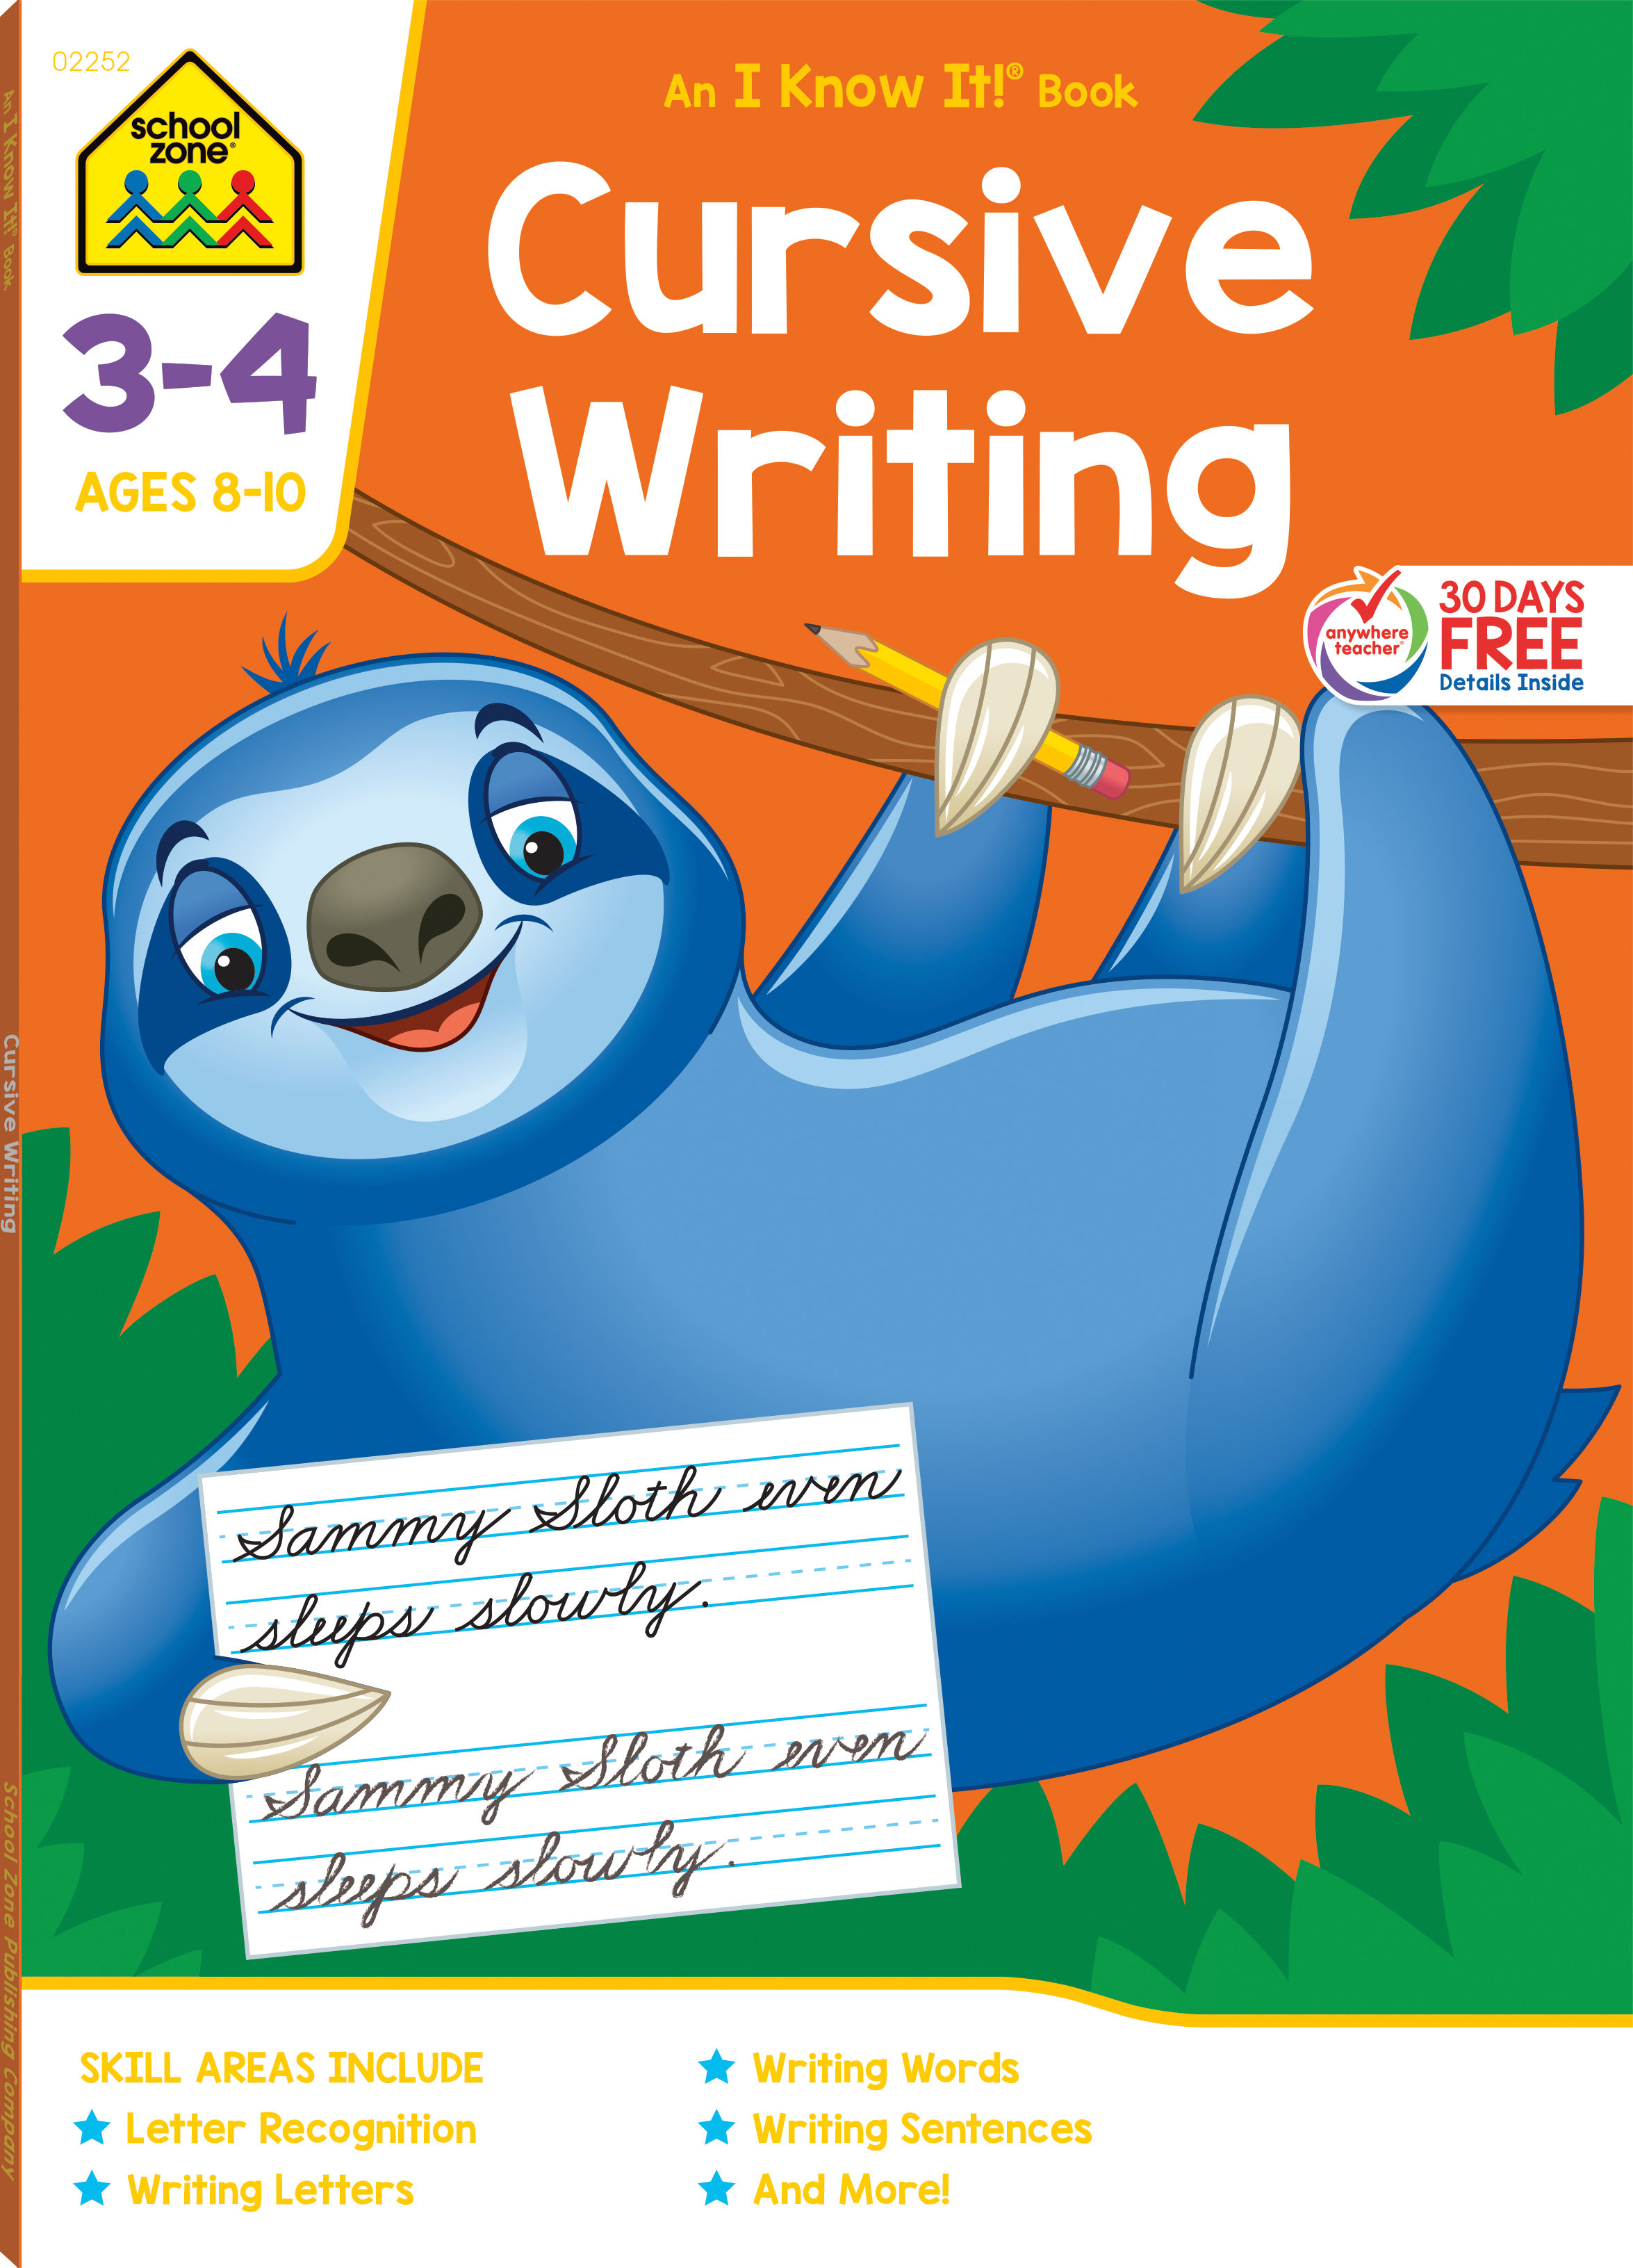 Cursive Handwriting Workbook For Kids: Writing Practice Book 3-in-1  Letters, Words & Numbers. Workbook for beginners to learn writing in  cursive. Curs a book by Chase Malone